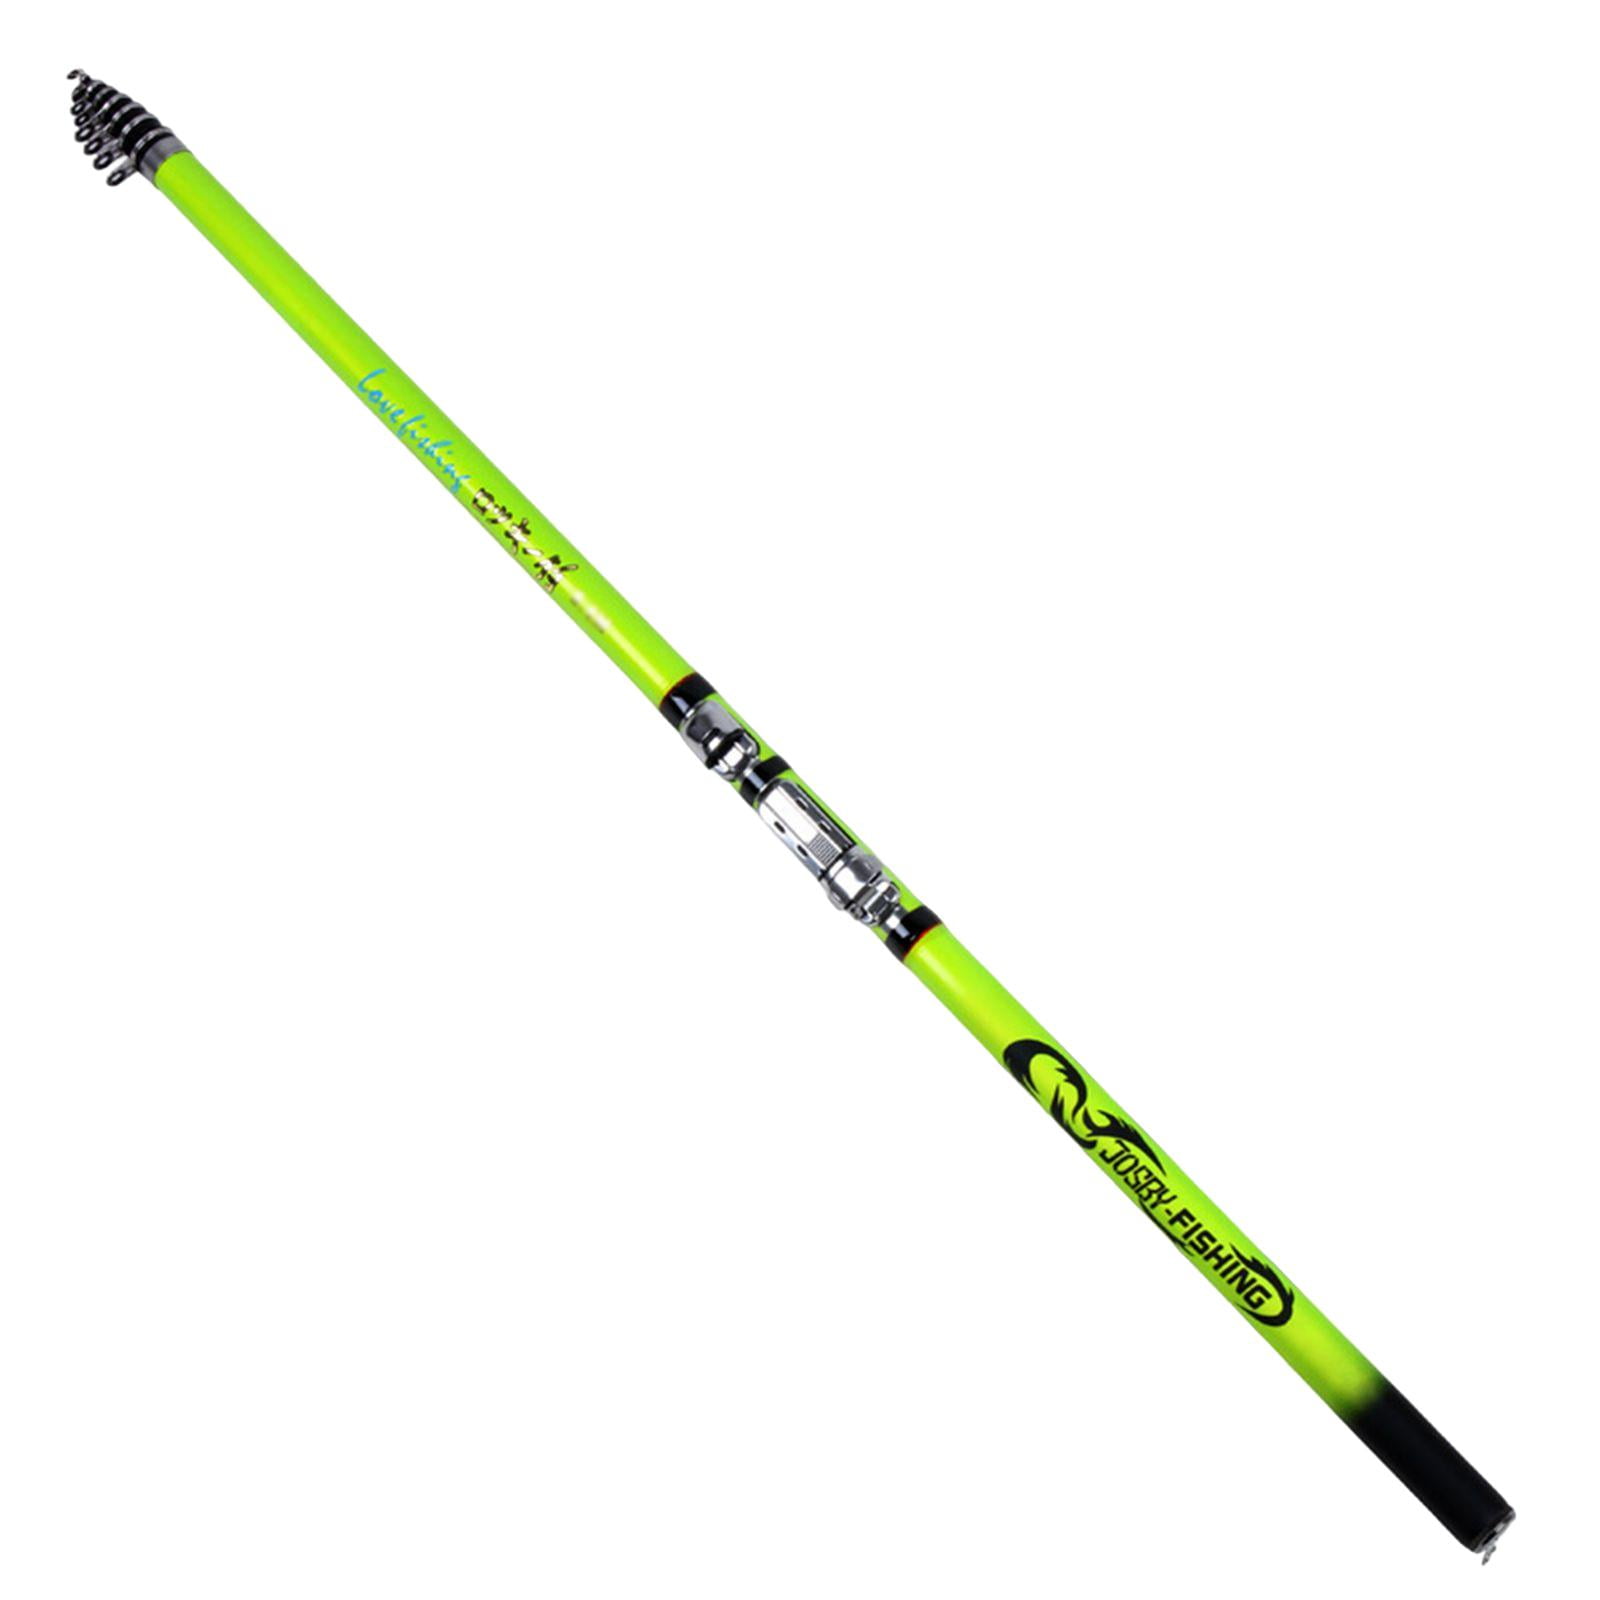 Telescopic Fishing Rod Collapsible Rod Convenient to Carry